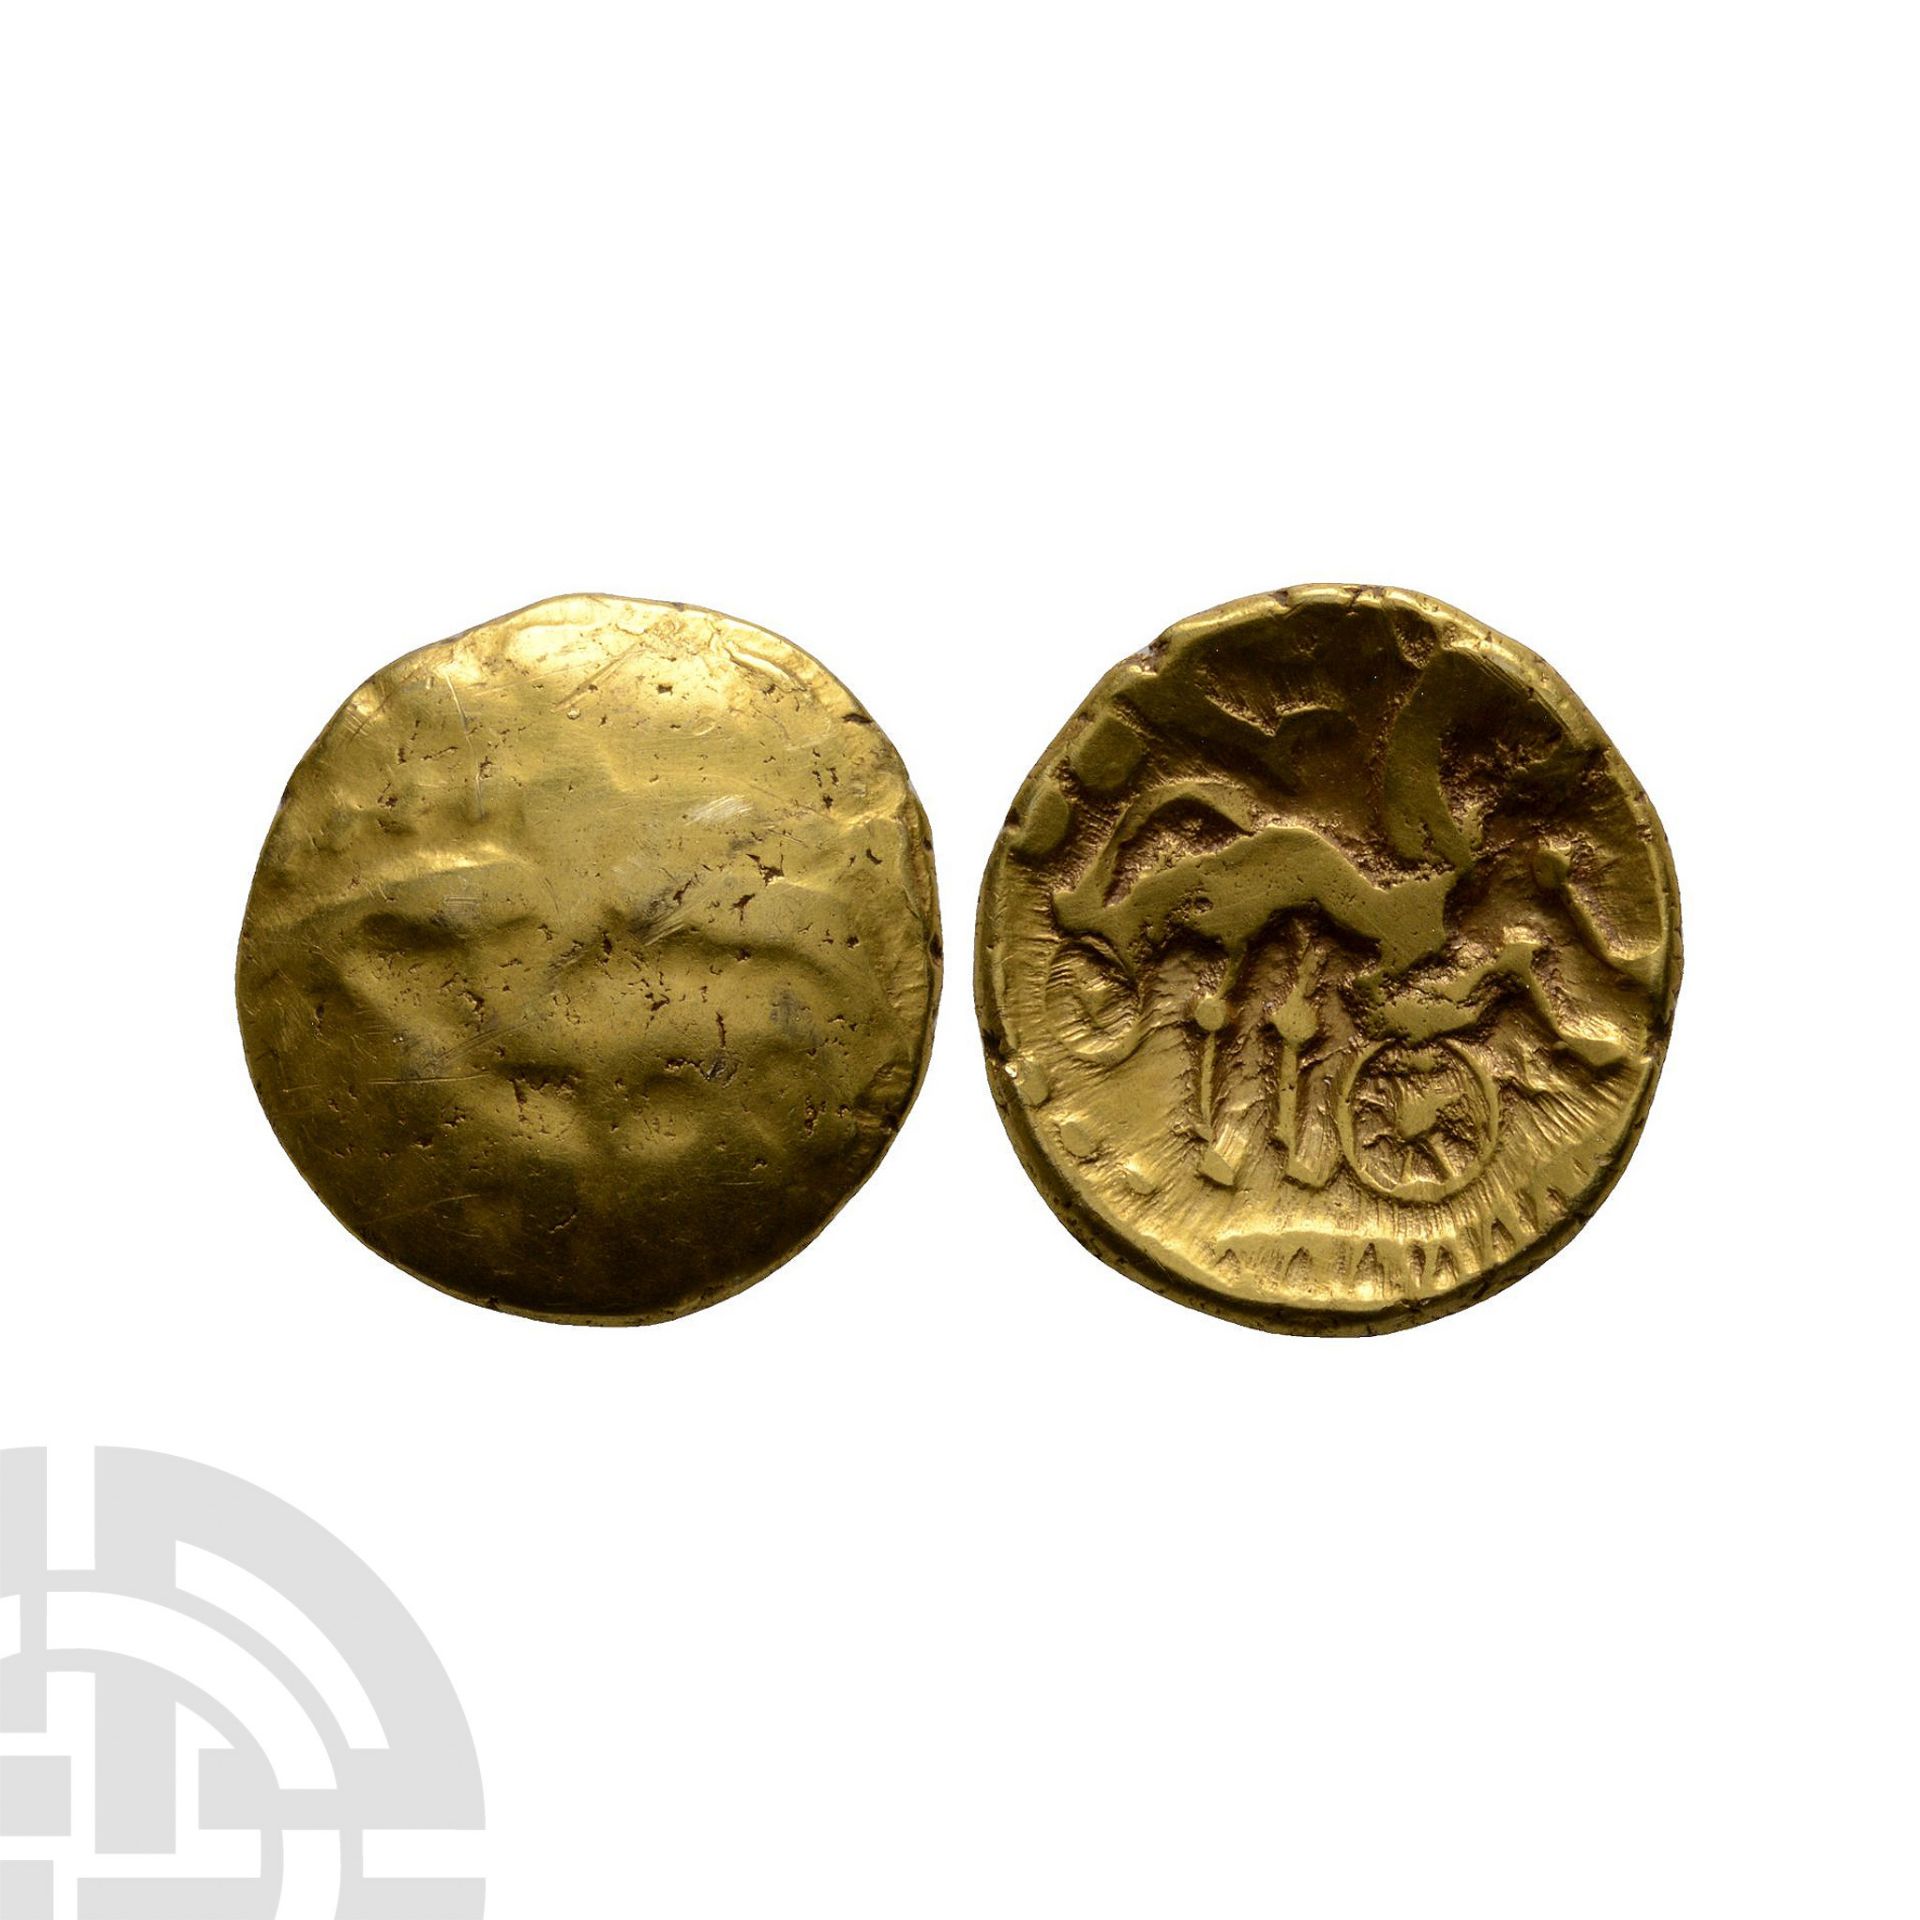 Celtic Iron Age Coins - Atrebates and Regni - Selsey Two-Faced Gold Stater